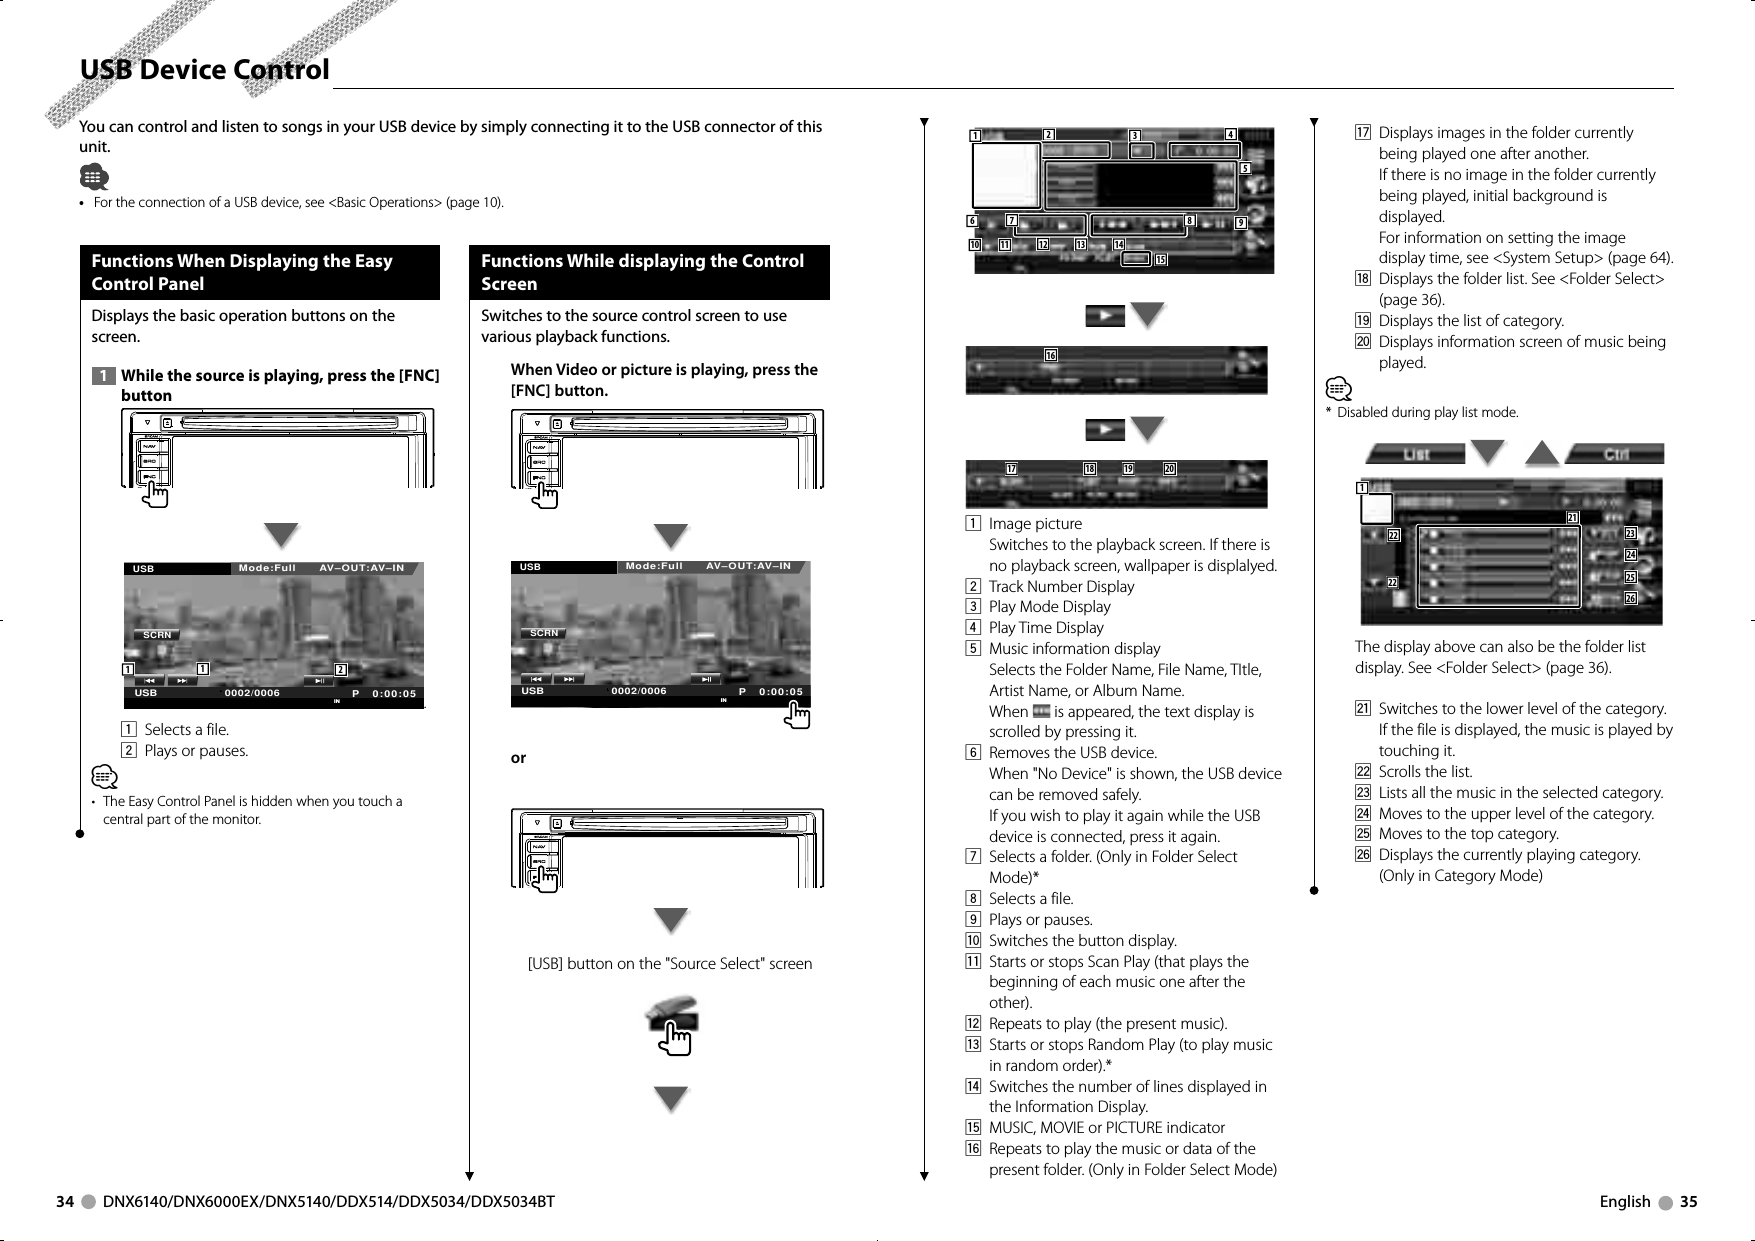 34     DNX6140/DNX6000EX/DNX5140/DDX514/DDX5034/DDX5034BT English     35You can control and listen to songs in your USB device by simply connecting it to the USB connector of this  unit. •  For the connection of a USB device, see &lt;Basic Operations&gt; (page 10).USB Device ControlFunctions When Displaying the Easy Control PanelDisplays the basic operation buttons on the screen.  1   While the source is playing, press the [FNC] buttonMode:Full AV–OUT:AV–INP 0:00:05USBINSCRN0002/0006USB112.1  Selects a file.2  Plays or pauses.⁄•  The Easy Control Panel is hidden when you touch a central part of the monitor.Functions While displaying the Control ScreenSwitches to the source control screen to use various playback functions.When Video or picture is playing, press the [FNC] button.Mode:Full AV–OUT:AV–INP 0:00:05USBINSCRN0002/0006USBor[USB] button on the &quot;Source Select&quot; screen524311910813 141267115 16 17 18 19 201 Image pictureSwitches to the playback screen. If there is no playback screen, wallpaper is displalyed.2  Track Number Display3  Play Mode Display4 Play Time Display5  Music information displaySelects the Folder Name, File Name, TItle, Artist Name, or Album Name. When  is appeared, the text display is scrolled by pressing it.6  Removes the USB device.When &quot;No Device&quot; is shown, the USB device can be removed safely.If you wish to play it again while the USB device is connected, press it again.7  Selects a folder. (Only in Folder Select Mode)*8 Selects a file.9  Plays or pauses.p  Switches the button display.q  Starts or stops Scan Play (that plays the beginning of each music one after the other). w  Repeats to play (the present music).e  Starts or stops Random Play (to play music in random order).*r  Switches the number of lines displayed in the Information Display.t  MUSIC, MOVIE or PICTURE indicatory  Repeats to play the music or data of the present folder. (Only in Folder Select Mode)u  Displays images in the folder currently being played one after another. If there is no image in the folder currently being played, initial background is displayed.For information on setting the image display time, see &lt;System Setup&gt; (page 64).i  Displays the folder list. See &lt;Folder Select&gt; (page 36).o  Displays the list of category.;  Displays information screen of music being played.⁄*  Disabled during play list mode.        222221232425261The display above can also be the folder list display. See &lt;Folder Select&gt; (page 36).a  Switches to the lower level of the category. If the file is displayed, the music is played by touching it.s  Scrolls the list.d  Lists all the music in the selected category.f  Moves to the upper level of the category.g  Moves to the top category.h  Displays the currently playing category. (Only in Category Mode)B64-4254-00_00.indb   34-35 08.10.16   10:47:55 AM